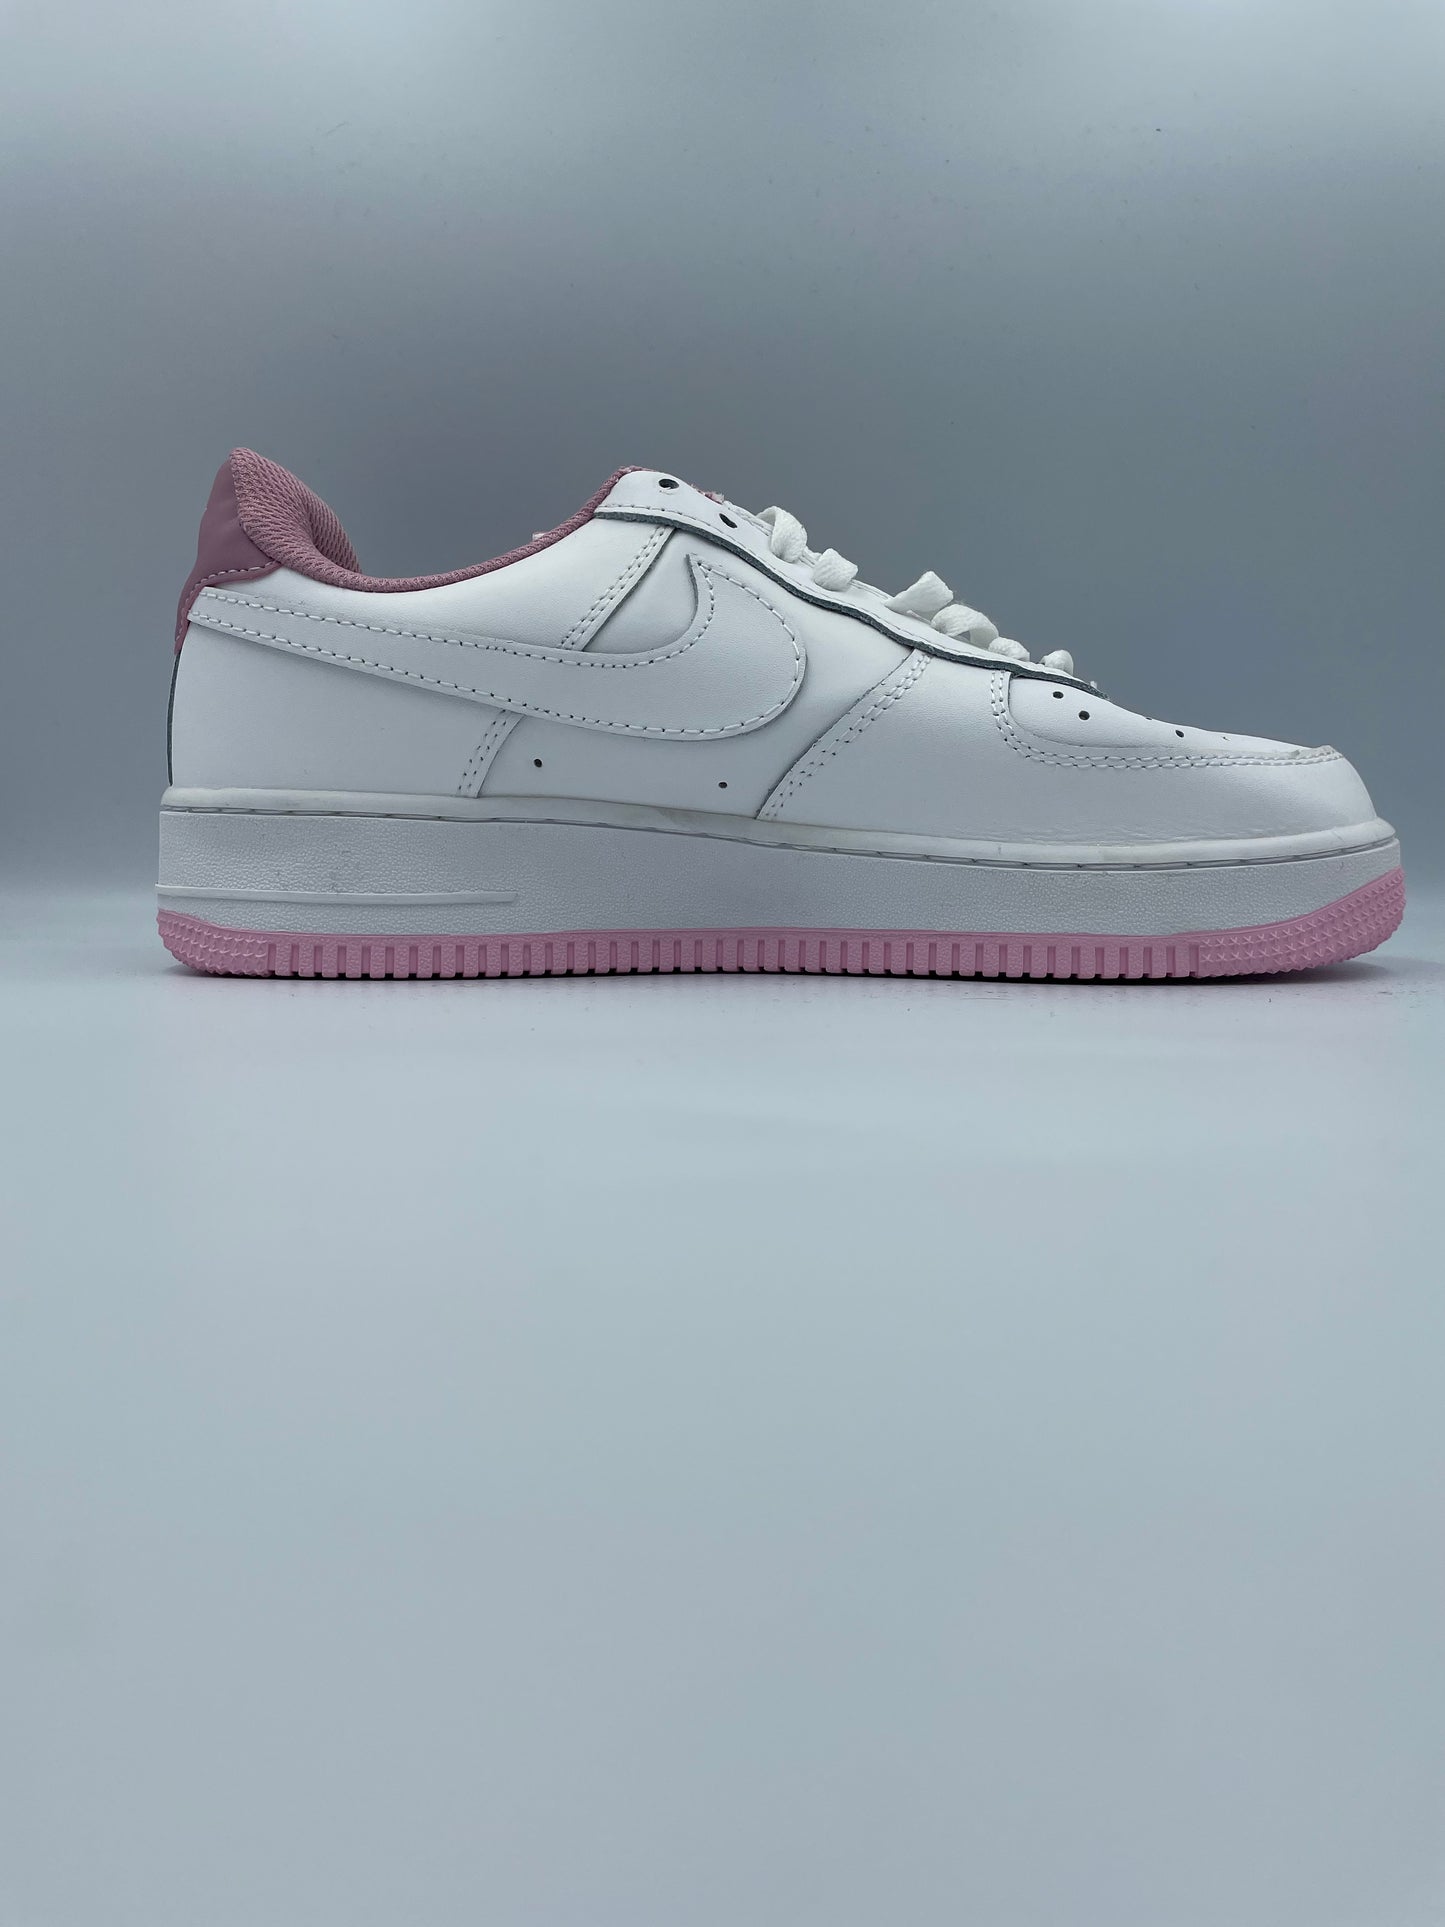 NIKE AIR FORCE 1 LOW 'WHITE ICED LILAC'